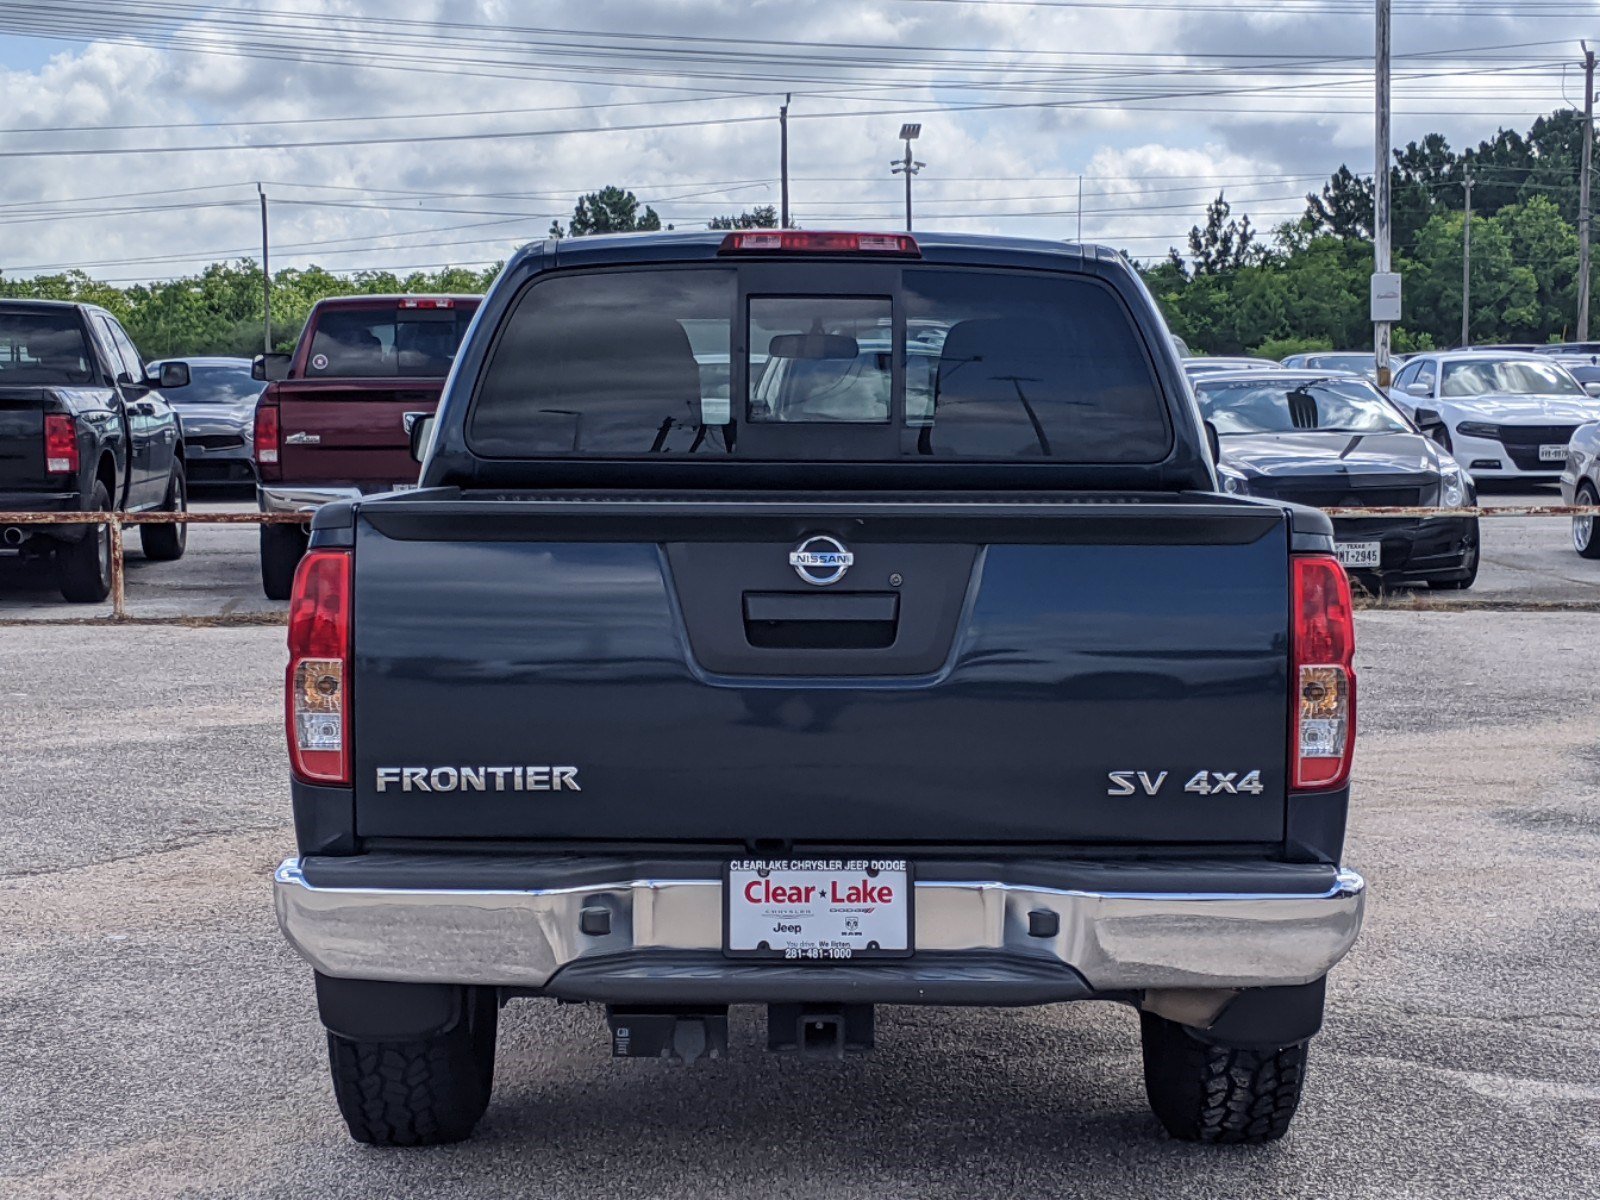 Pre-Owned 2018 Nissan Frontier SV V6 Crew Cab Pickup in Webster 2018 Nissan Frontier Sv V6 Towing Capacity